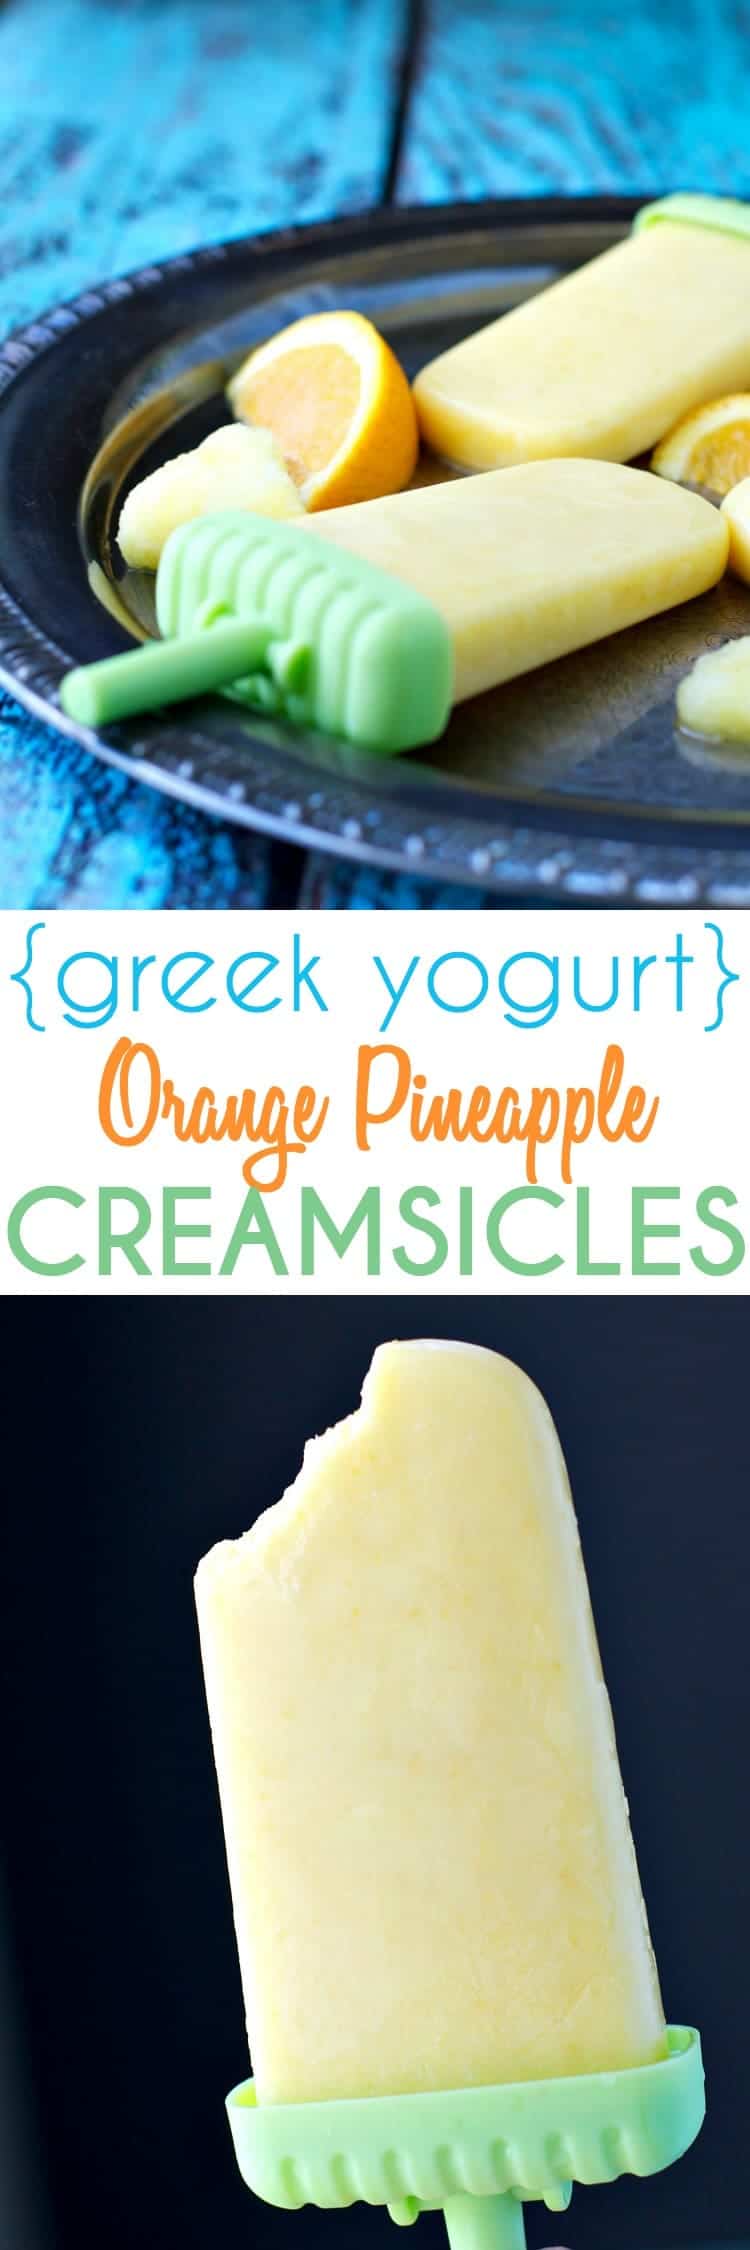 For about 40 calories you can enjoy these cool and creamy Greek Yogurt Orange Pineapple Creamsicles that are bursting with tropical citrus flavor! And with no added sugar, the homemade popsicles are healthy enough to eat for breakfast, snack or dessert! 